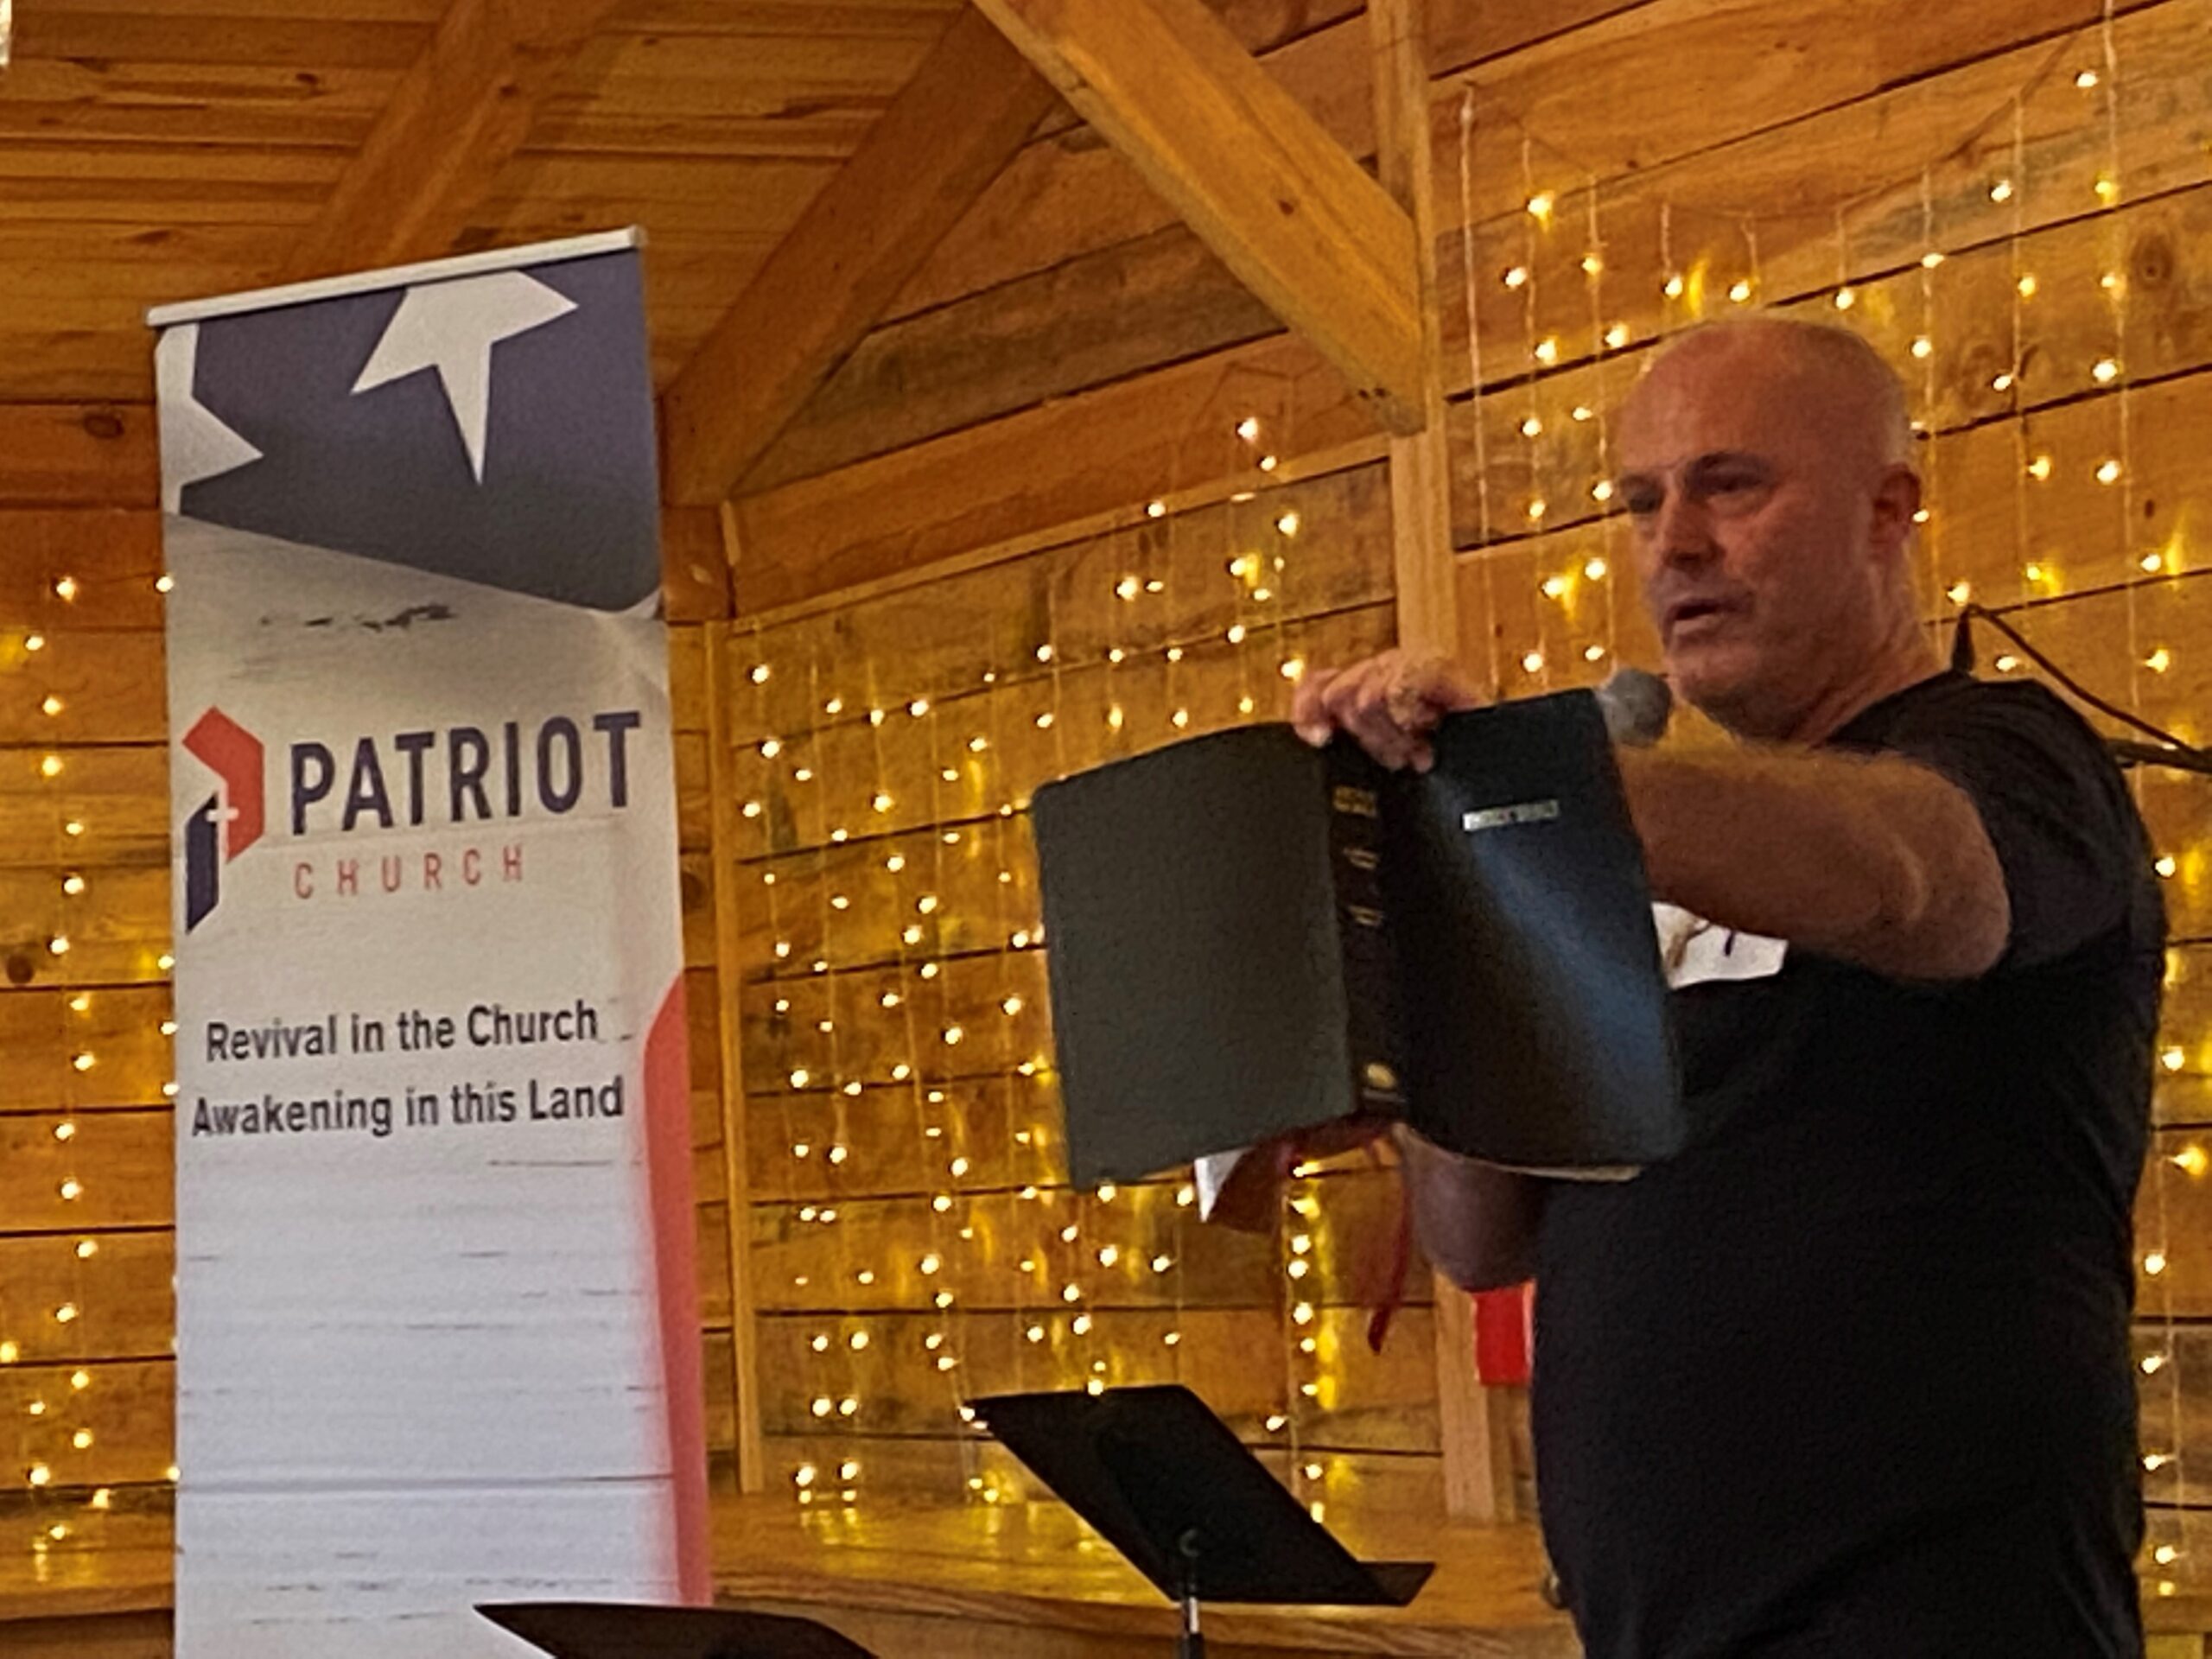 Ken Peters of Patriot Church dramatically holds up a bible near a sign reading "Patriot Church: Revival in the Church, Awakening in this Land."